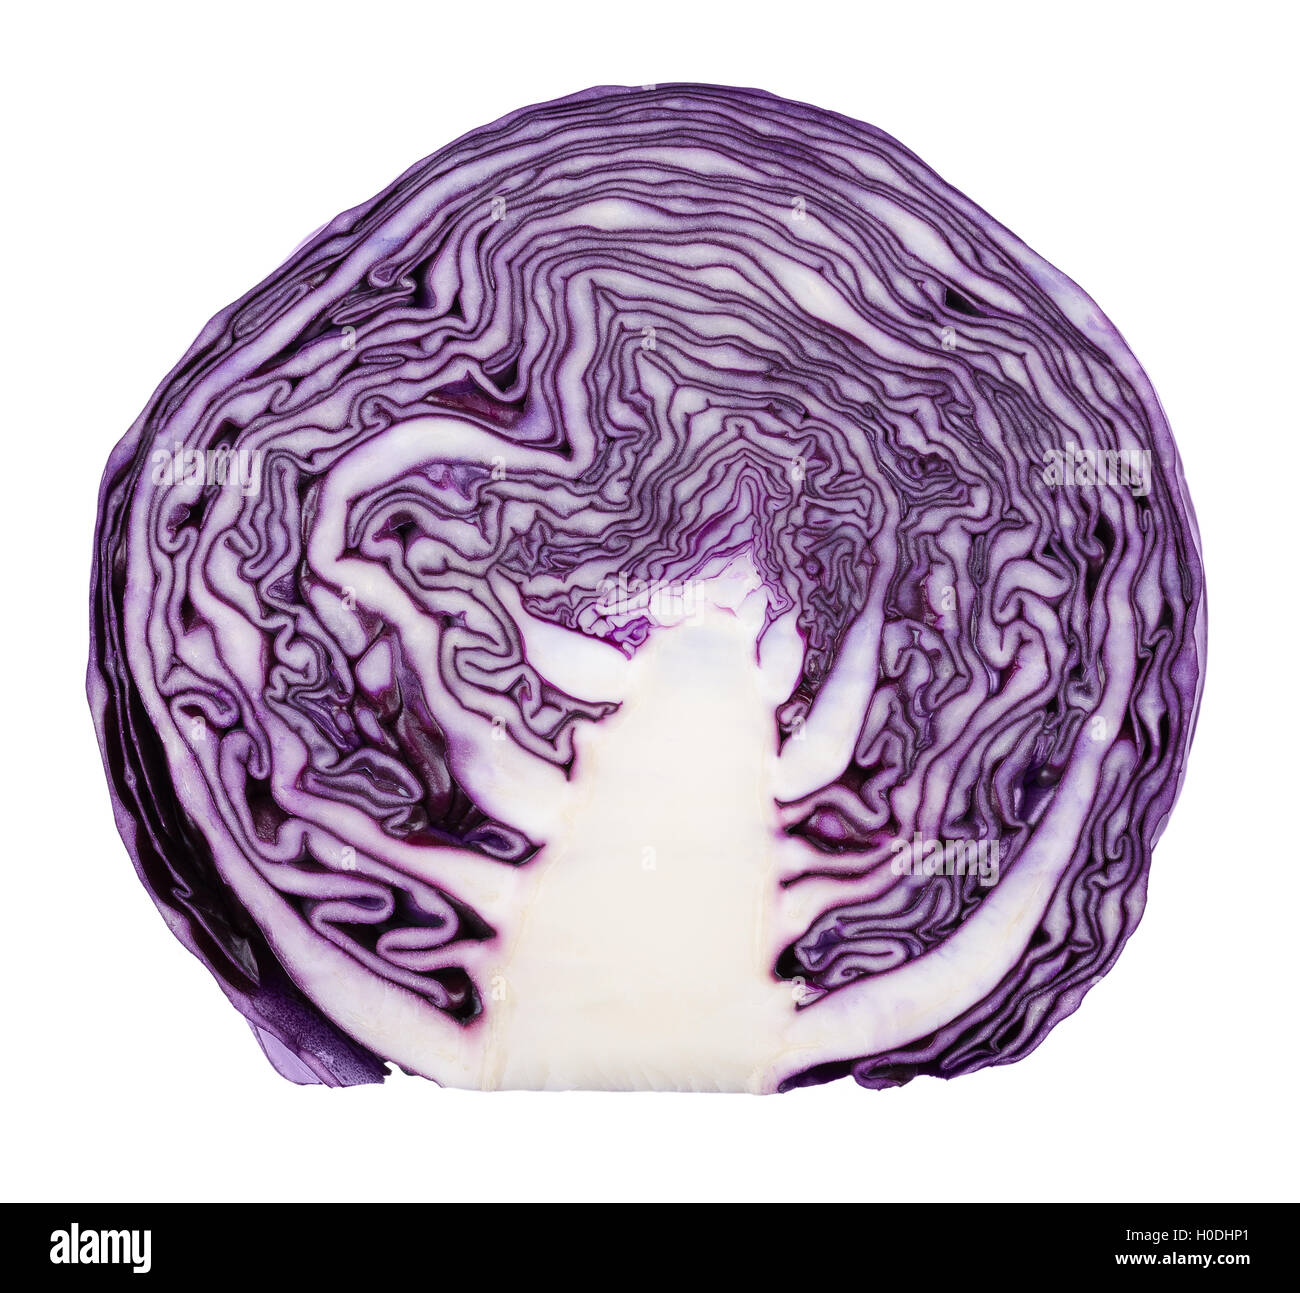 Red cabbage cross-section over white background. Purple-leaved variety of Brassica oleracea, also known as purple cabbage. Stock Photo